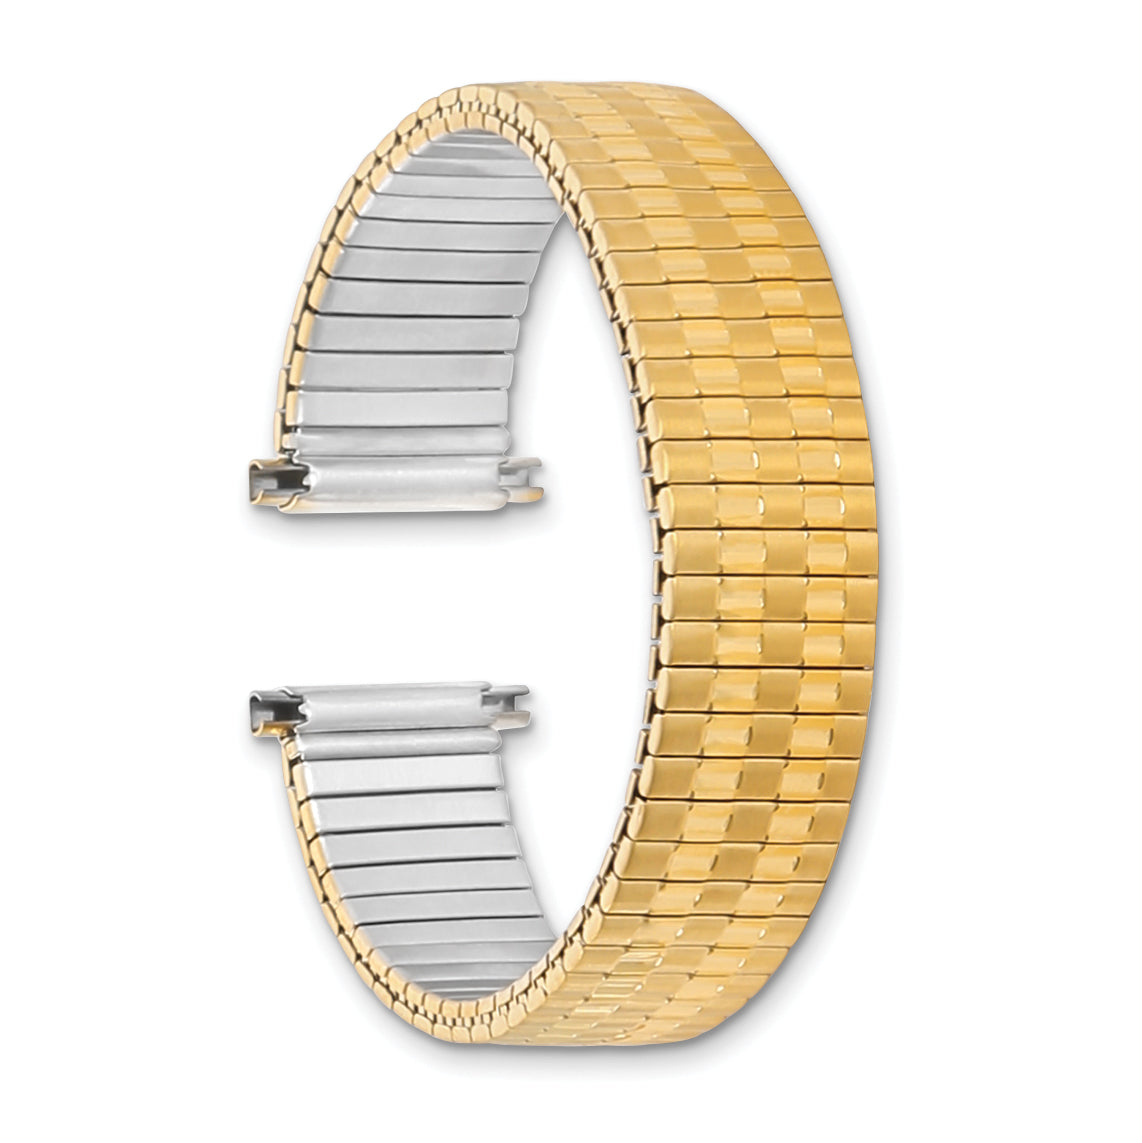 12-16mm Ladies Satin and Polished Gold-tone Stainless Steel Thin-Flexo Expansion Link 5.75 inch Watch Band